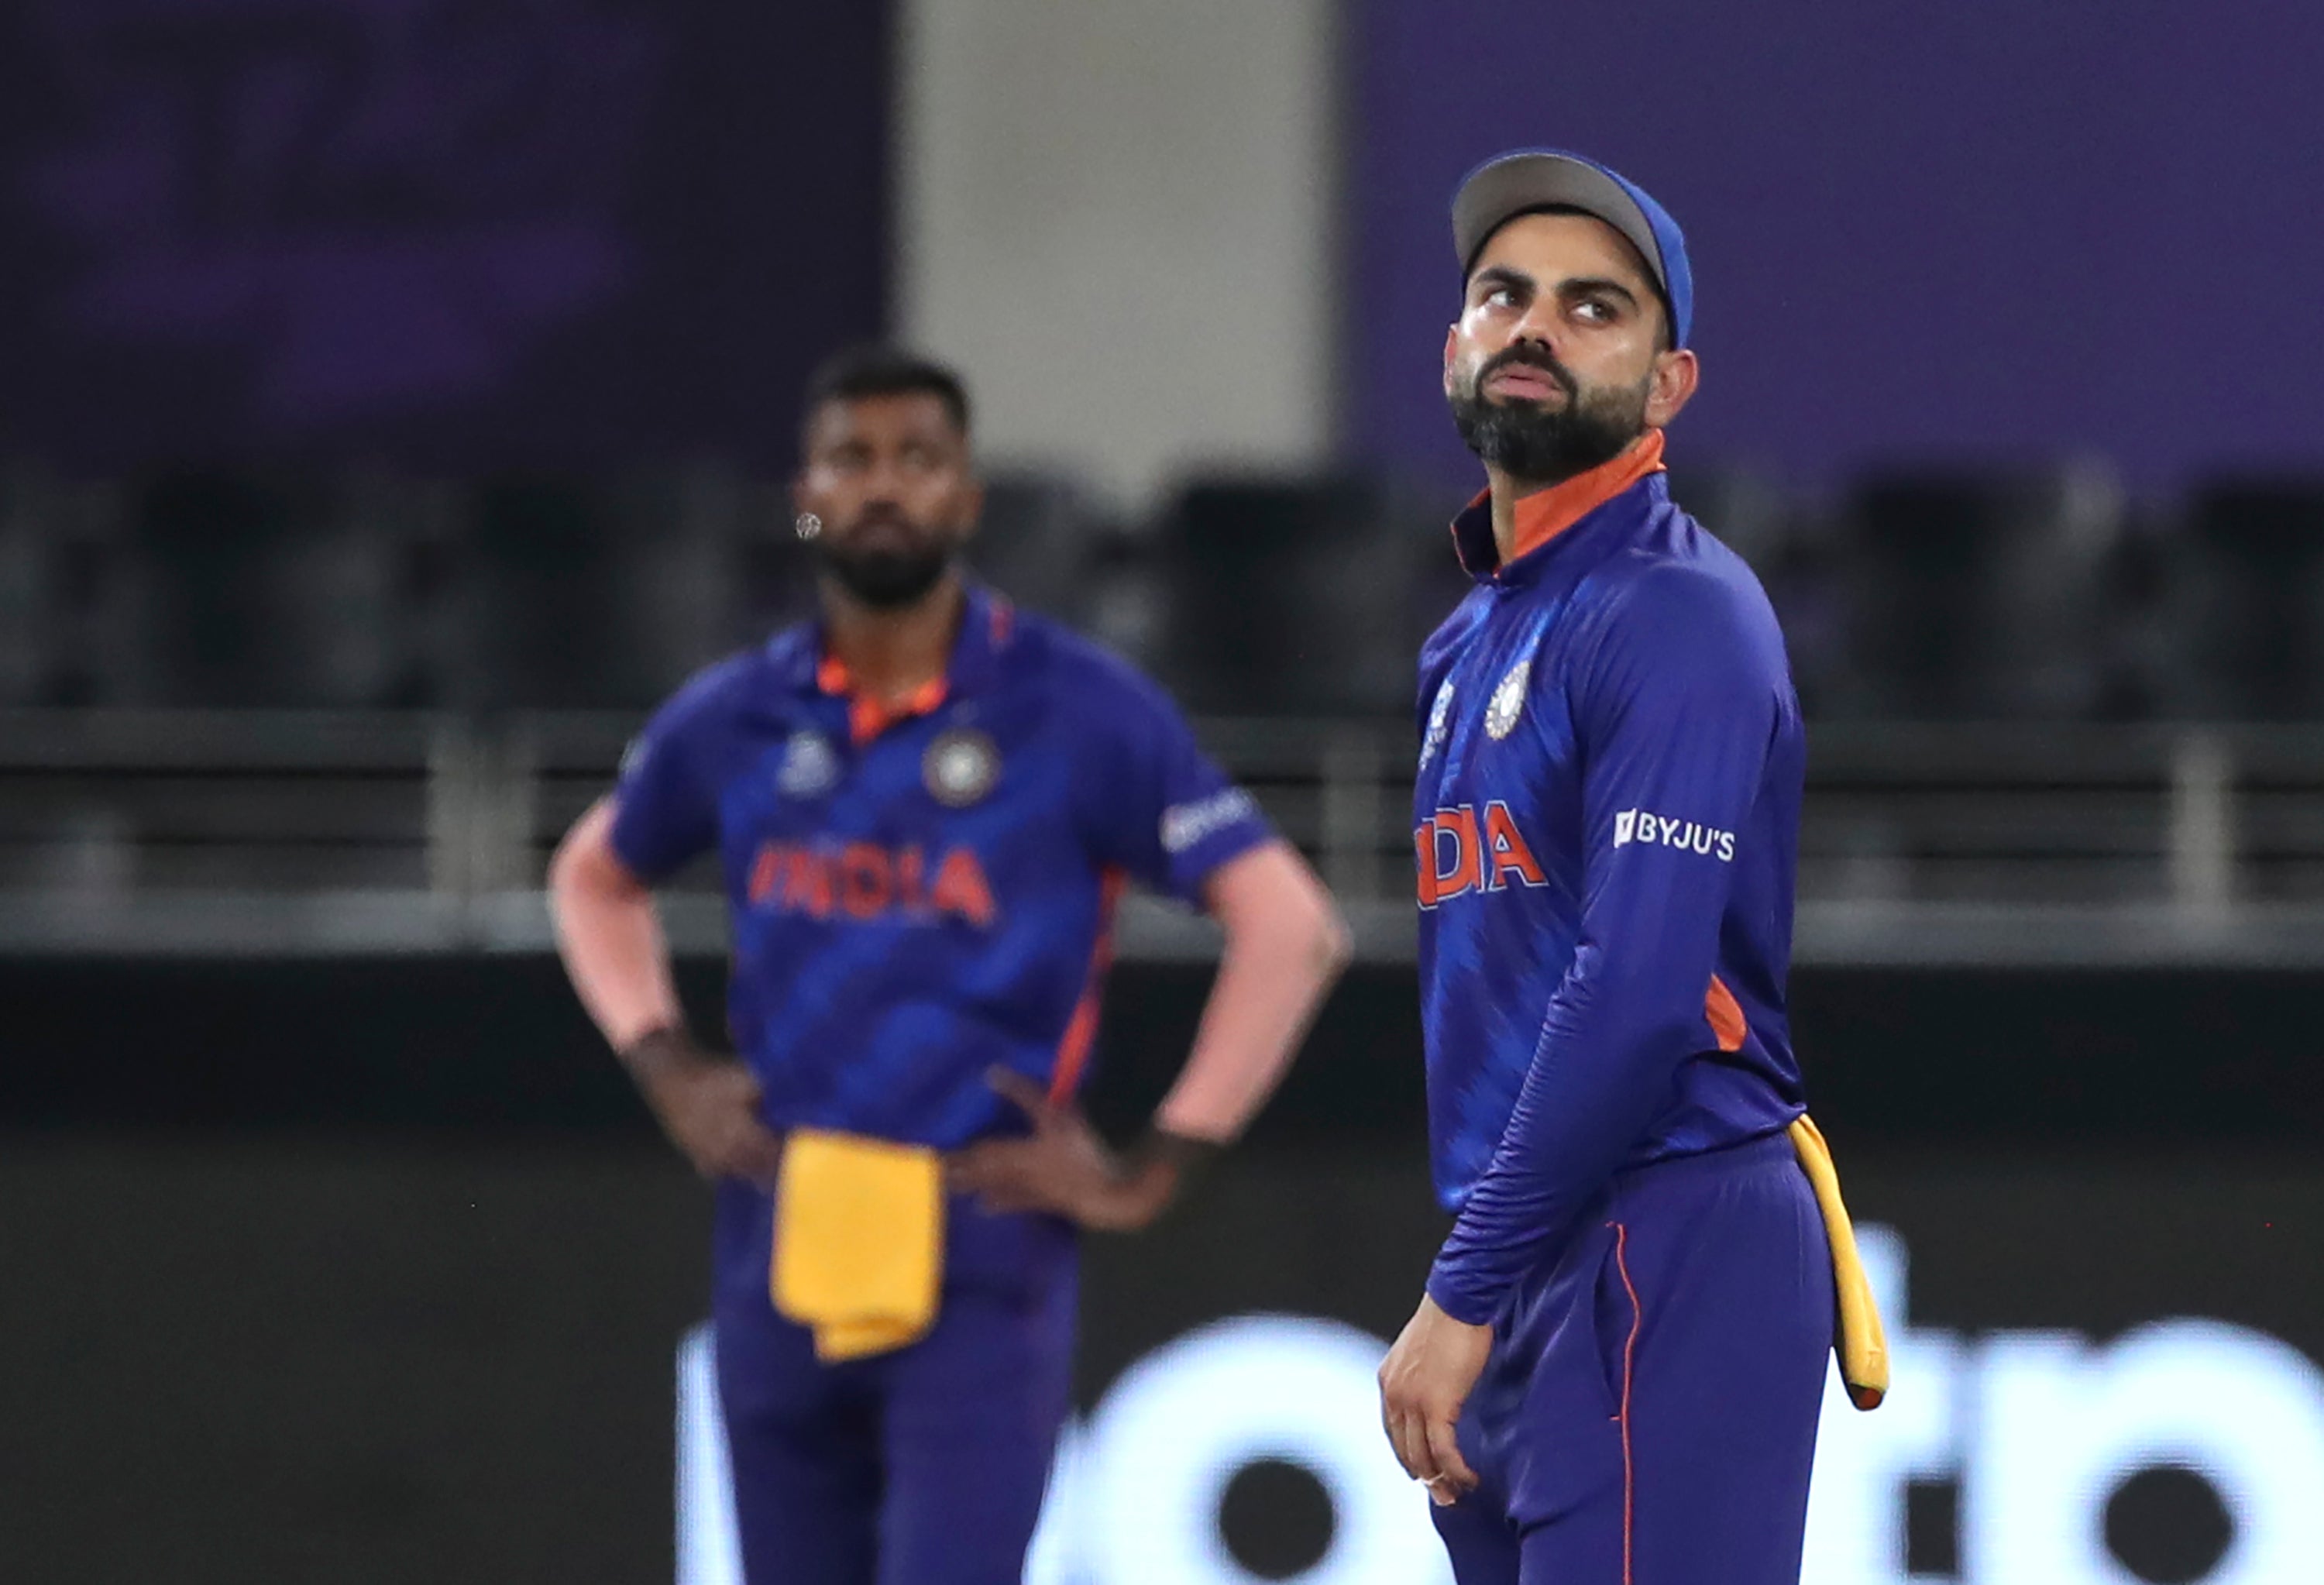 Virat Kohli broke his silence on Saturday to criticise the bigoted attack on his teammate Mohammed Shami